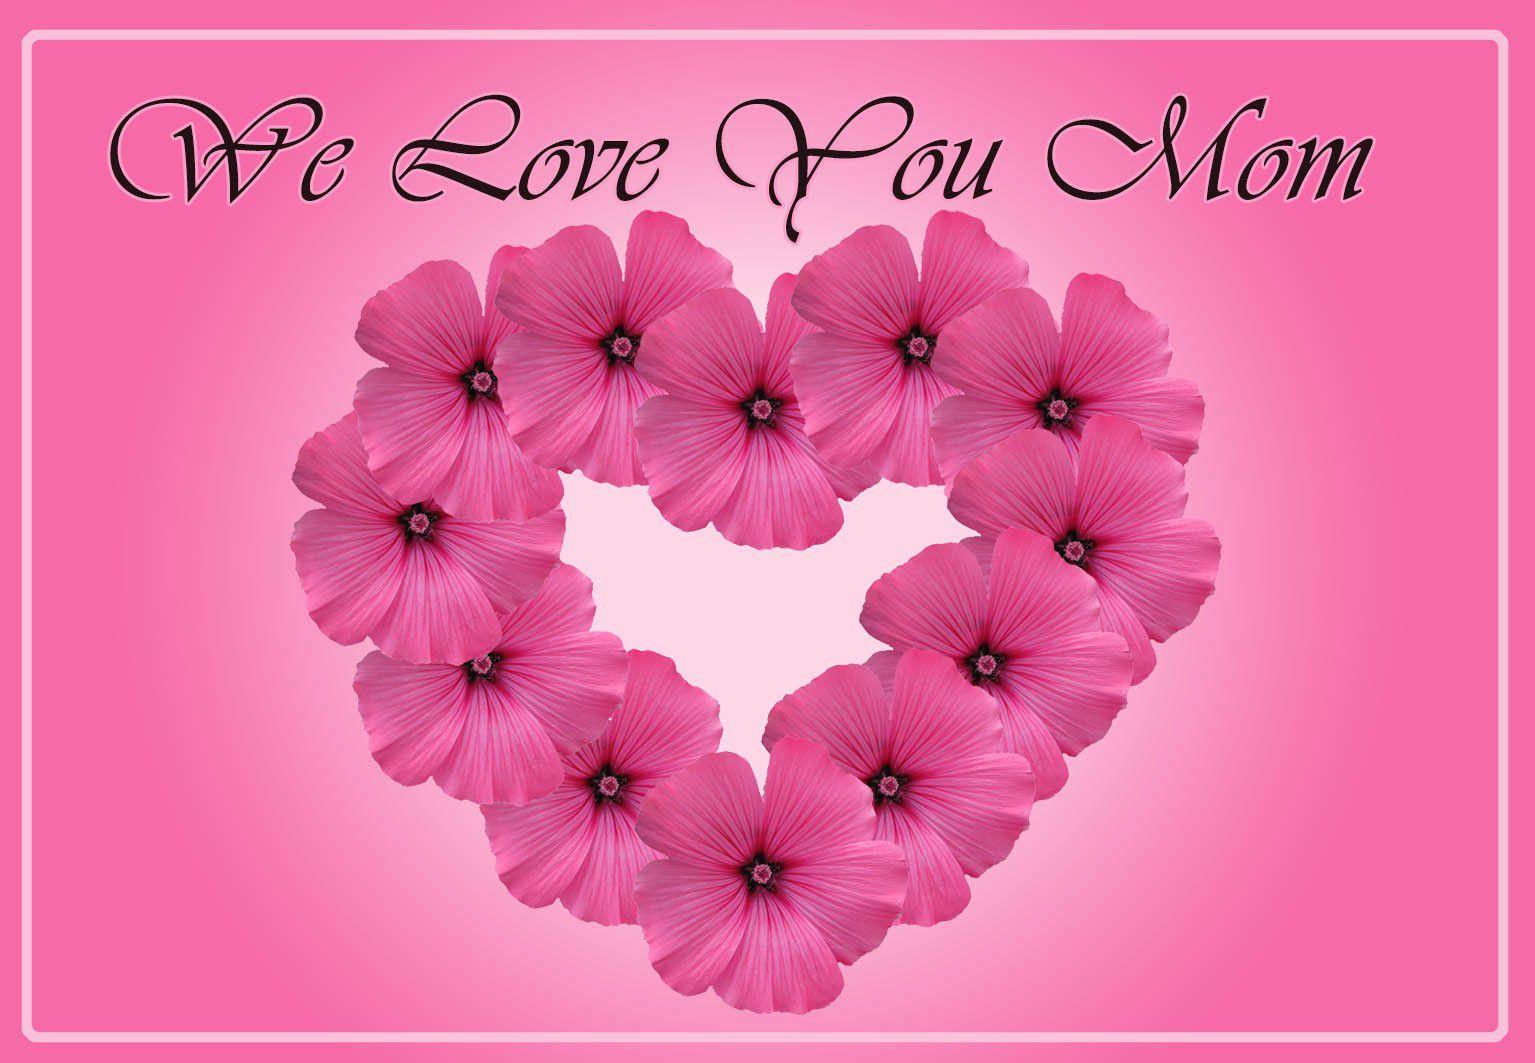 I love you mom wallpaper Gallery